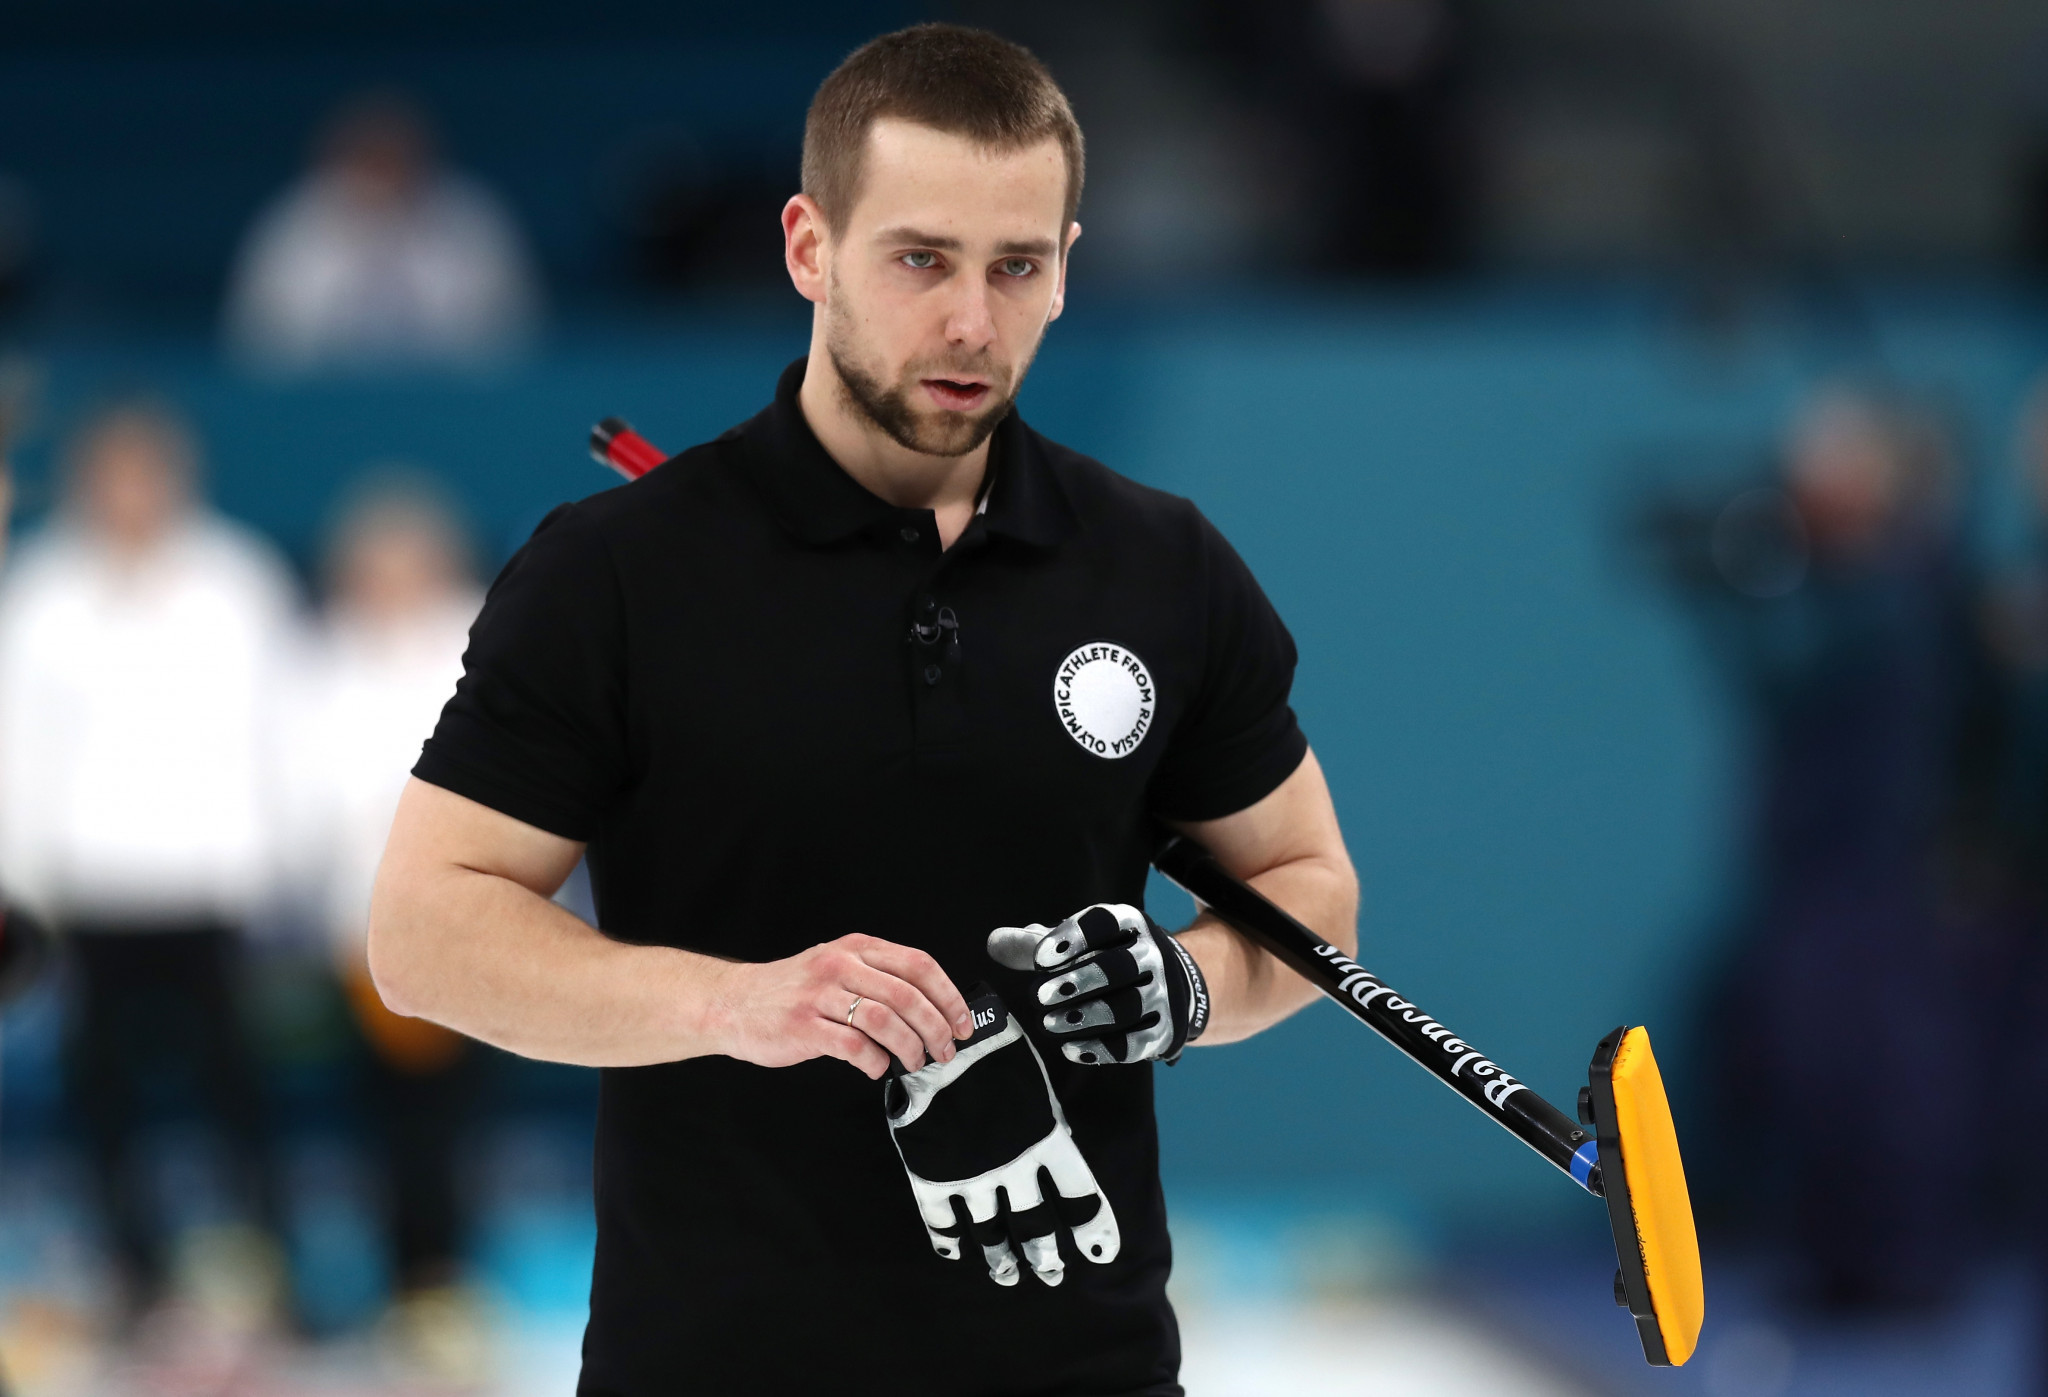 Russian curler says Pyeongchang 2018 drug test failure was not down to former girlfriend spiking him